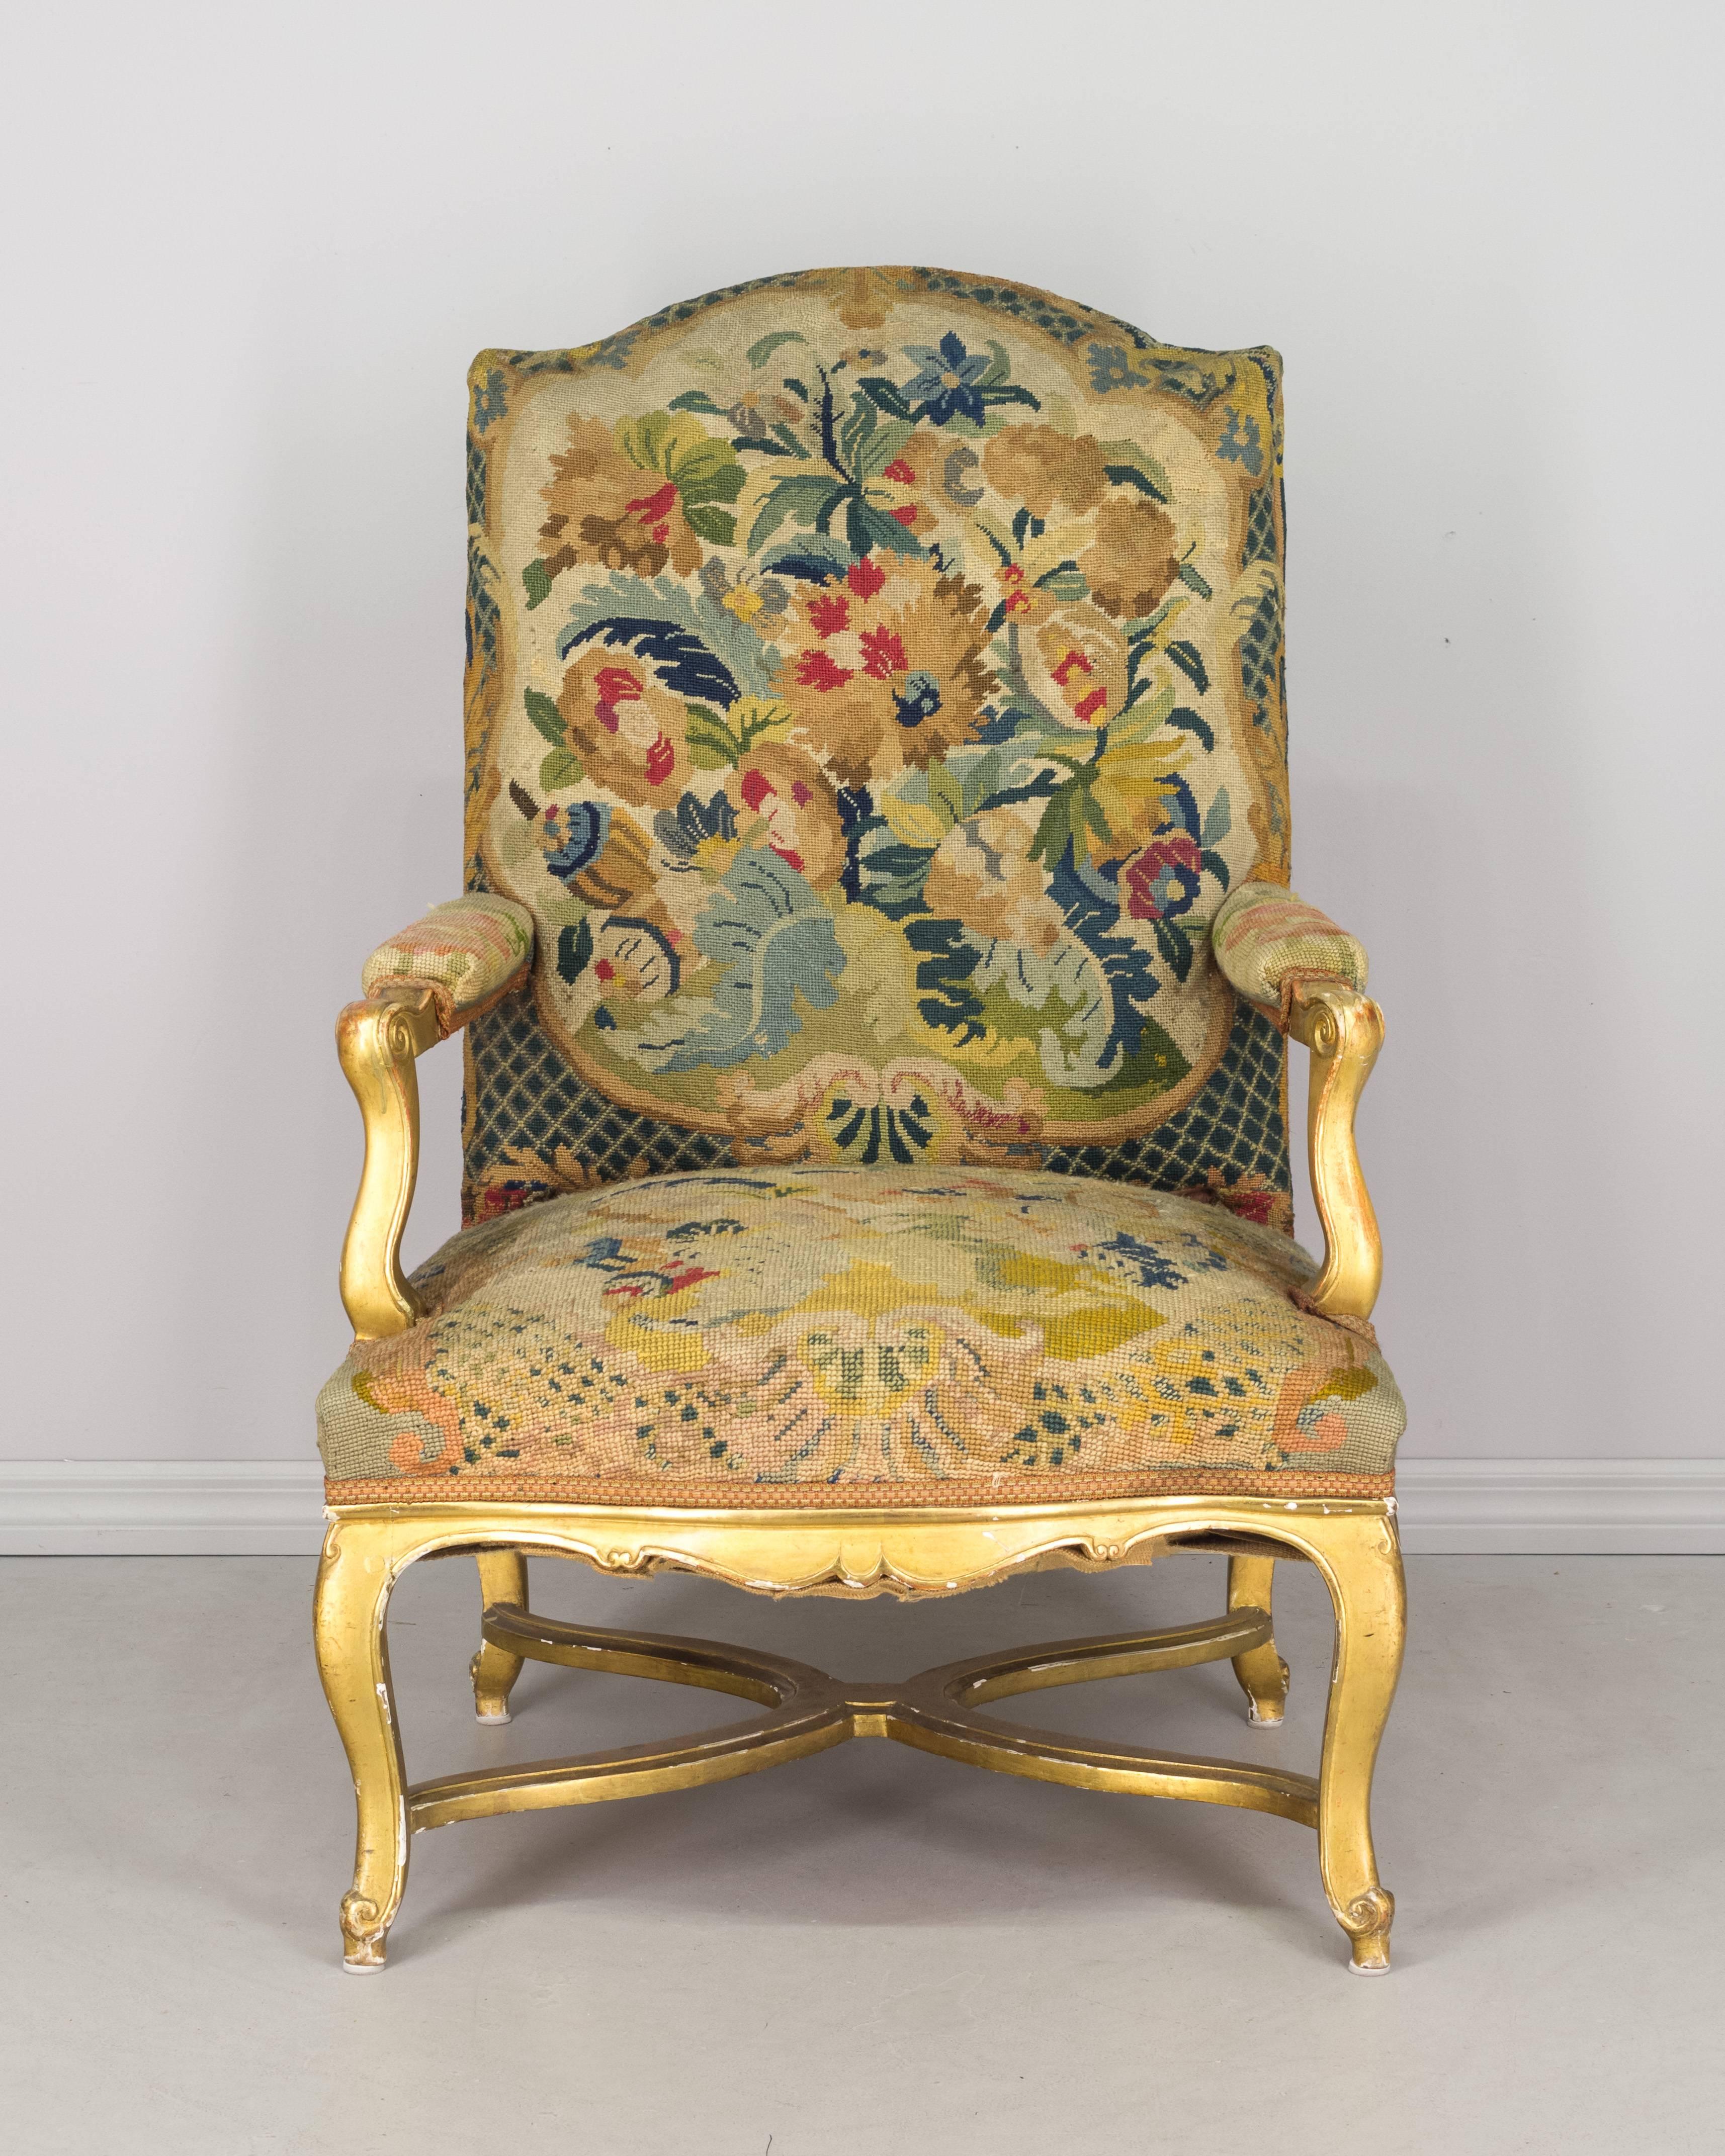 A 19th Century French fauteuil or armchair with gilded wood frame and upholstered in original petit point tapestry.